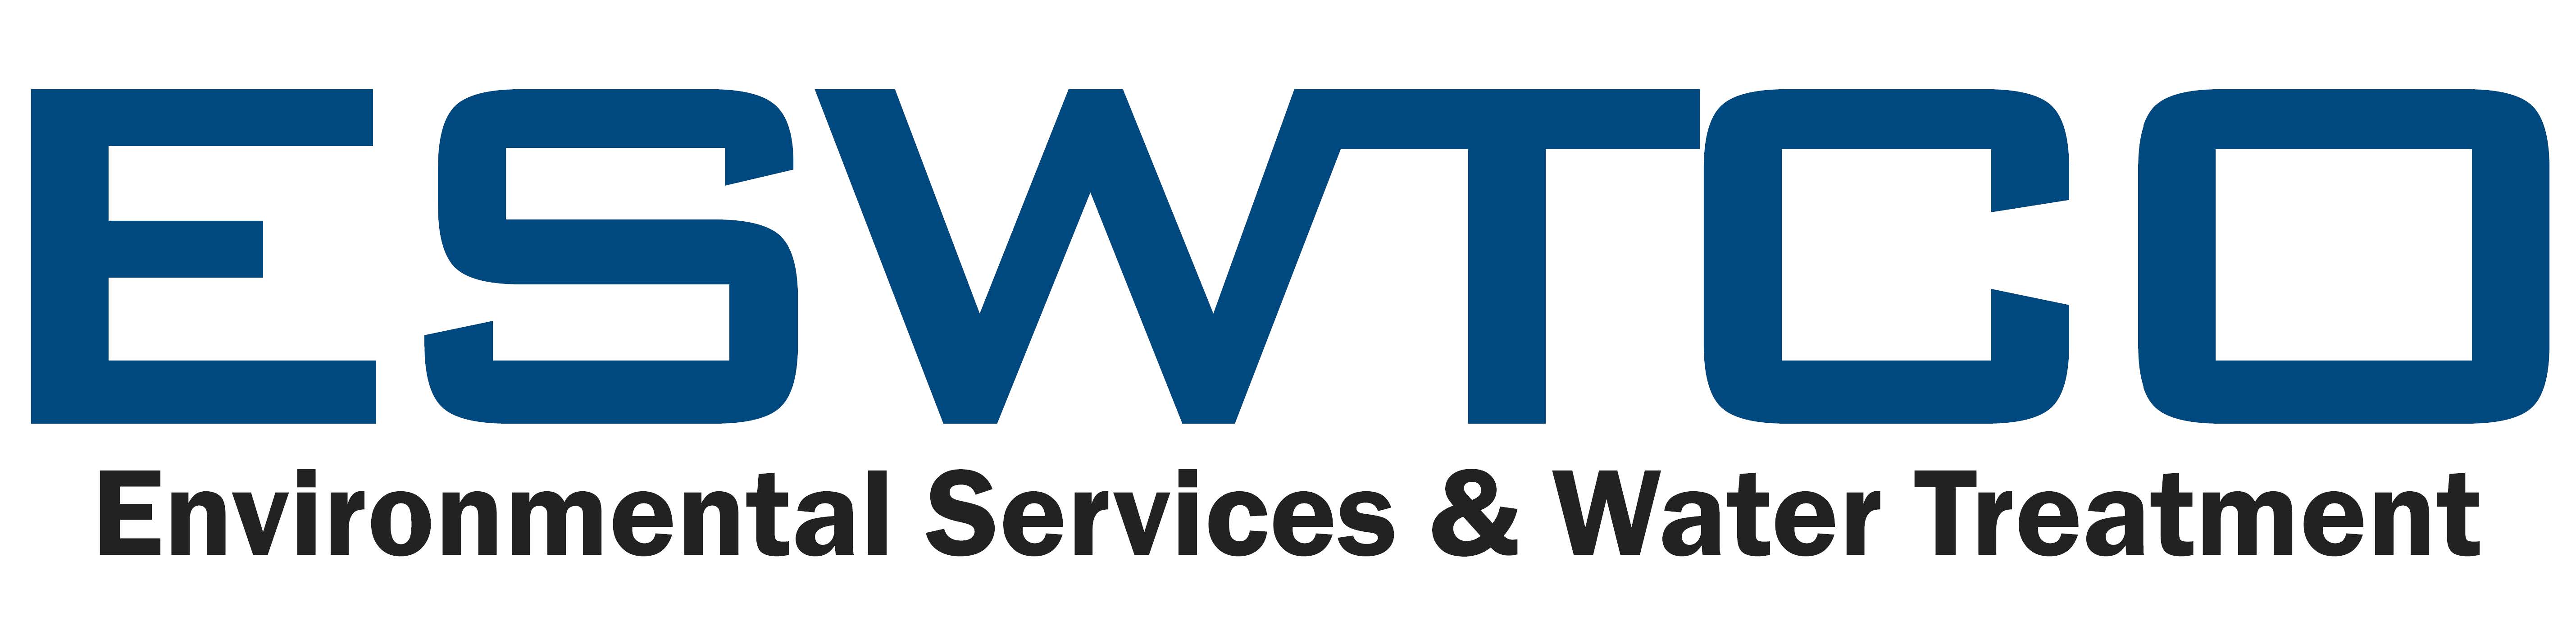 Environmental Services and Water Treatment Company (ESWTCO)